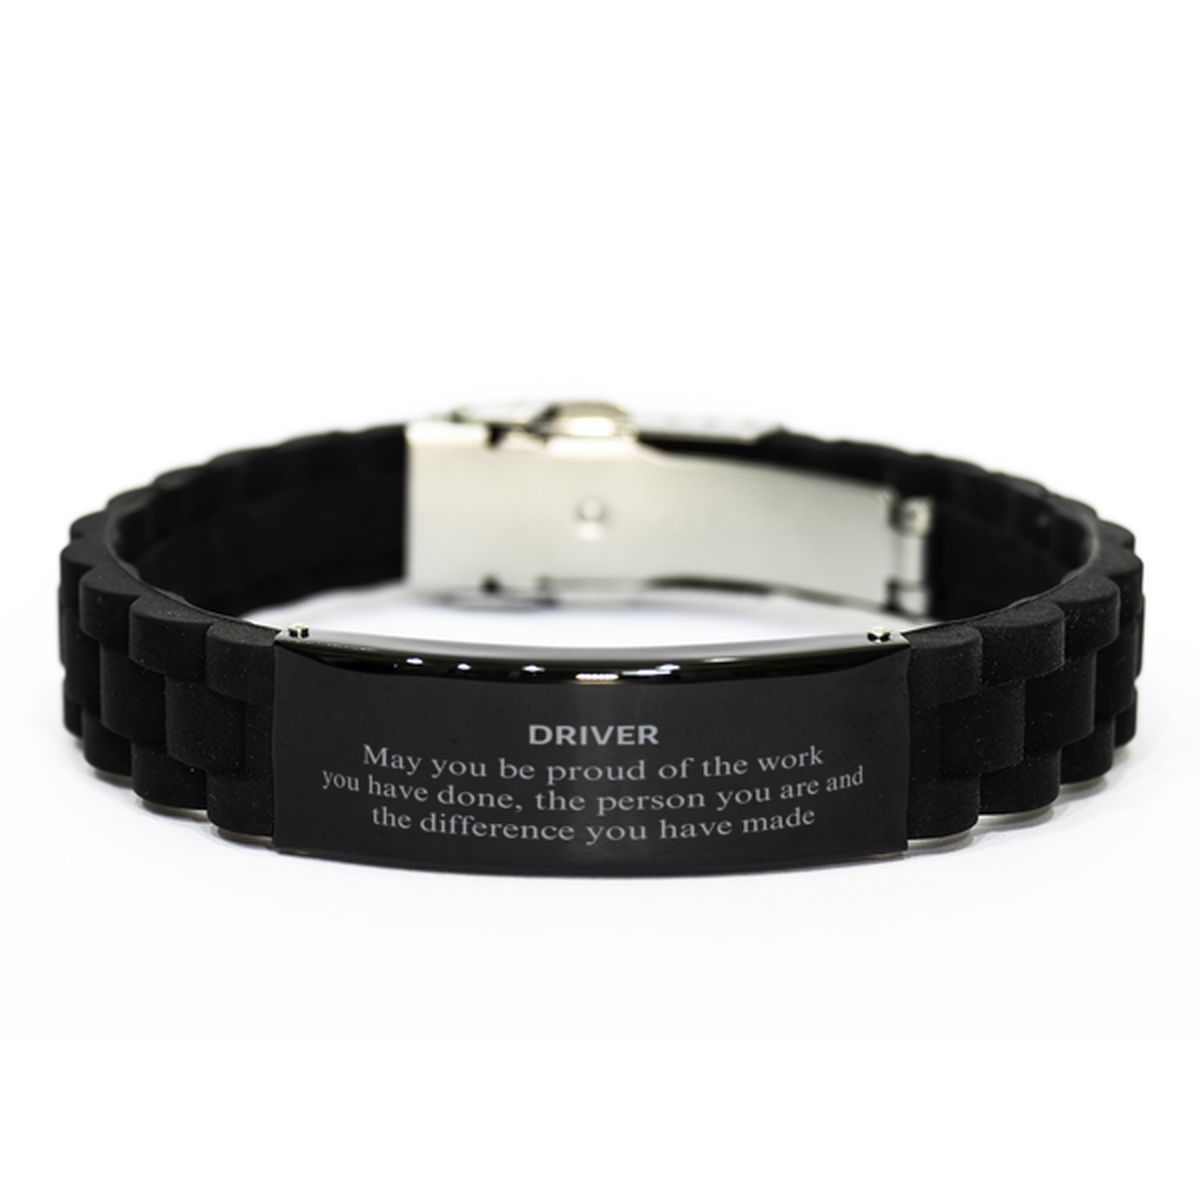 Driver May you be proud of the work you have done, Retirement Driver Black Glidelock Clasp Bracelet for Colleague Appreciation Gifts Amazing for Driver